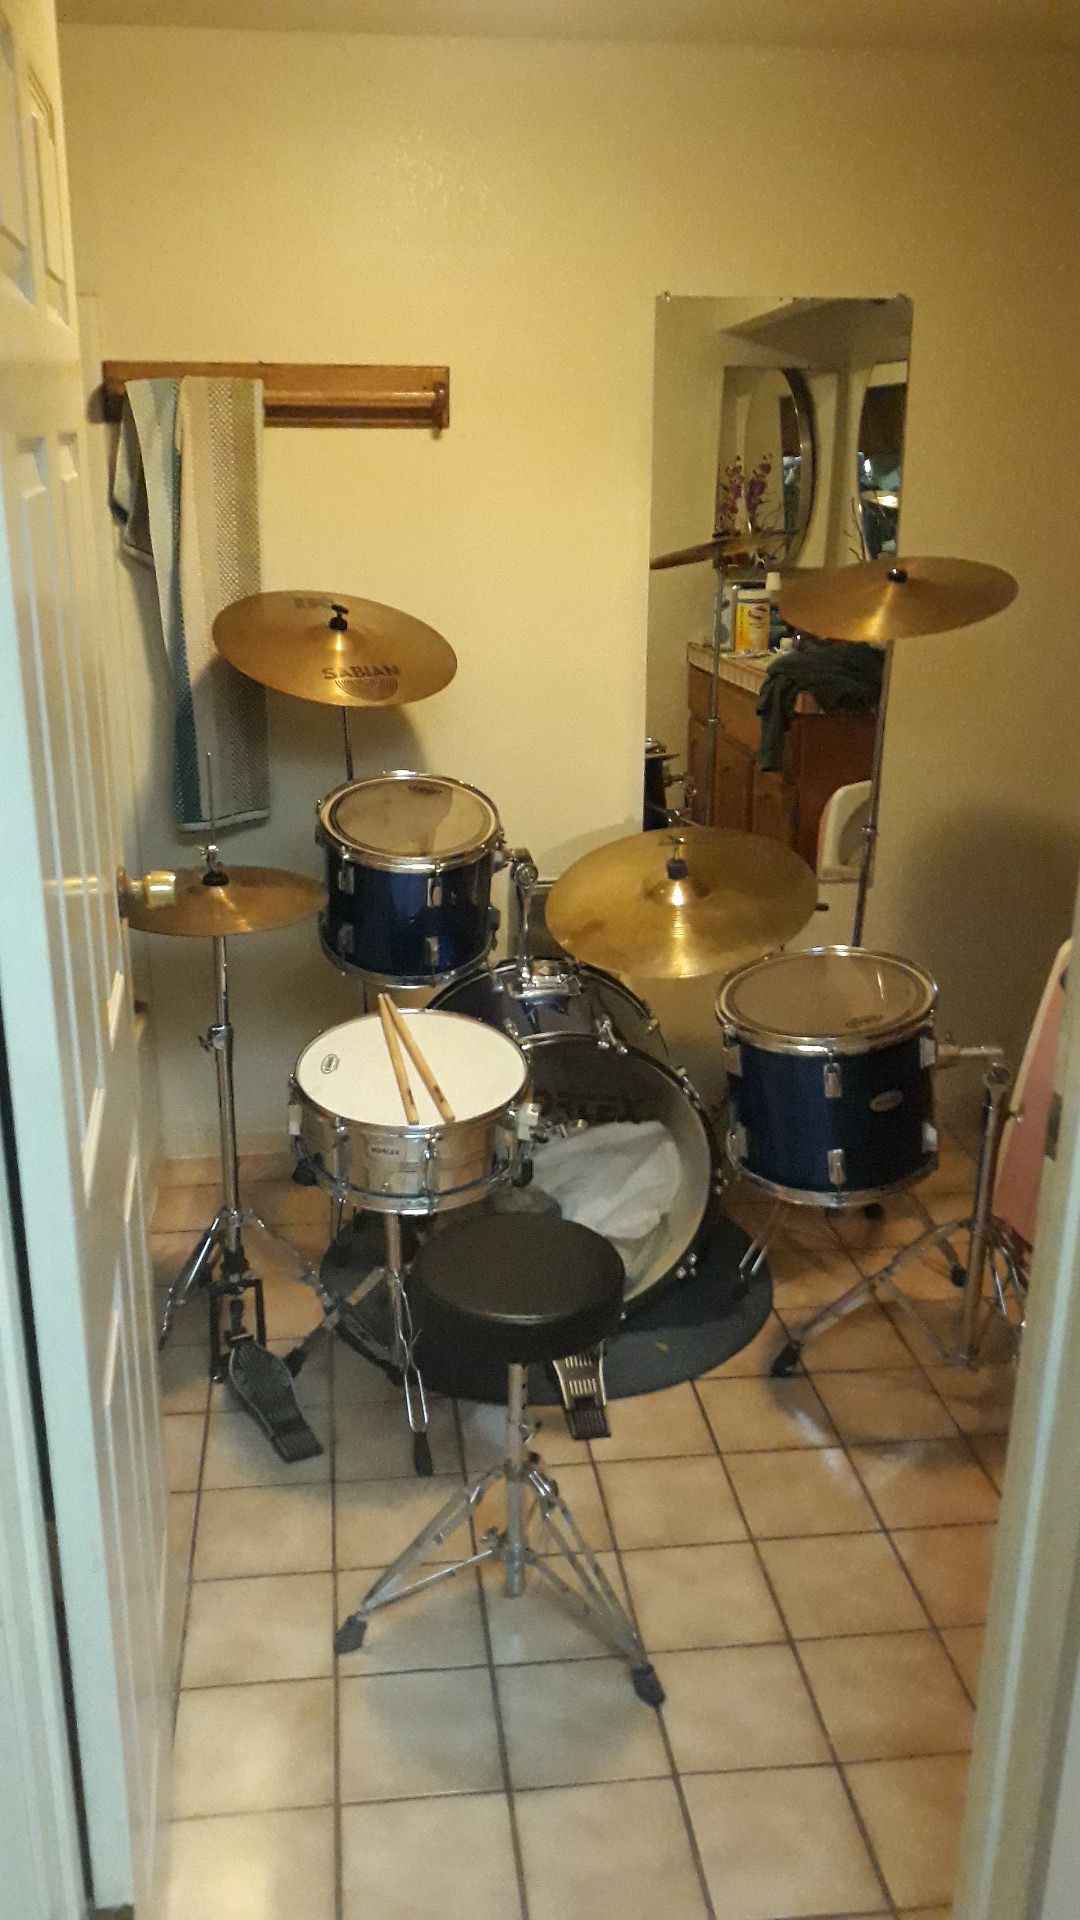 VORTEX 8 PEICE DRUM SET BLUE. TODAY ONLY SHOOT YOUR BEST OFFER OR TRADE